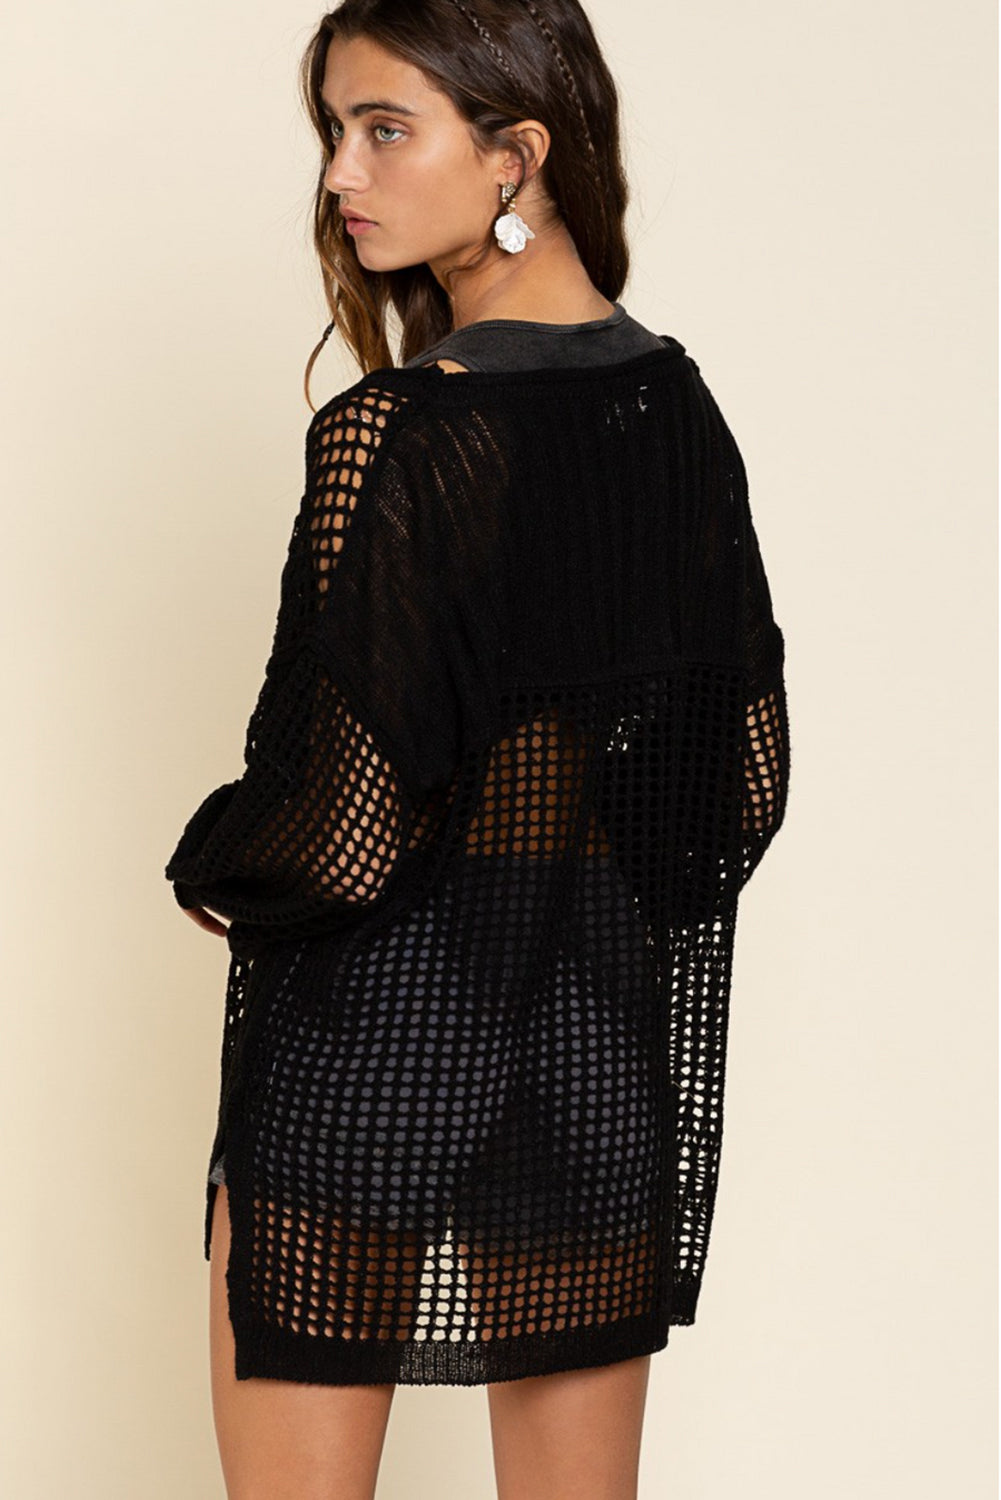 Black Fishnet Hollow-out Long Sleeve Beach Cover up